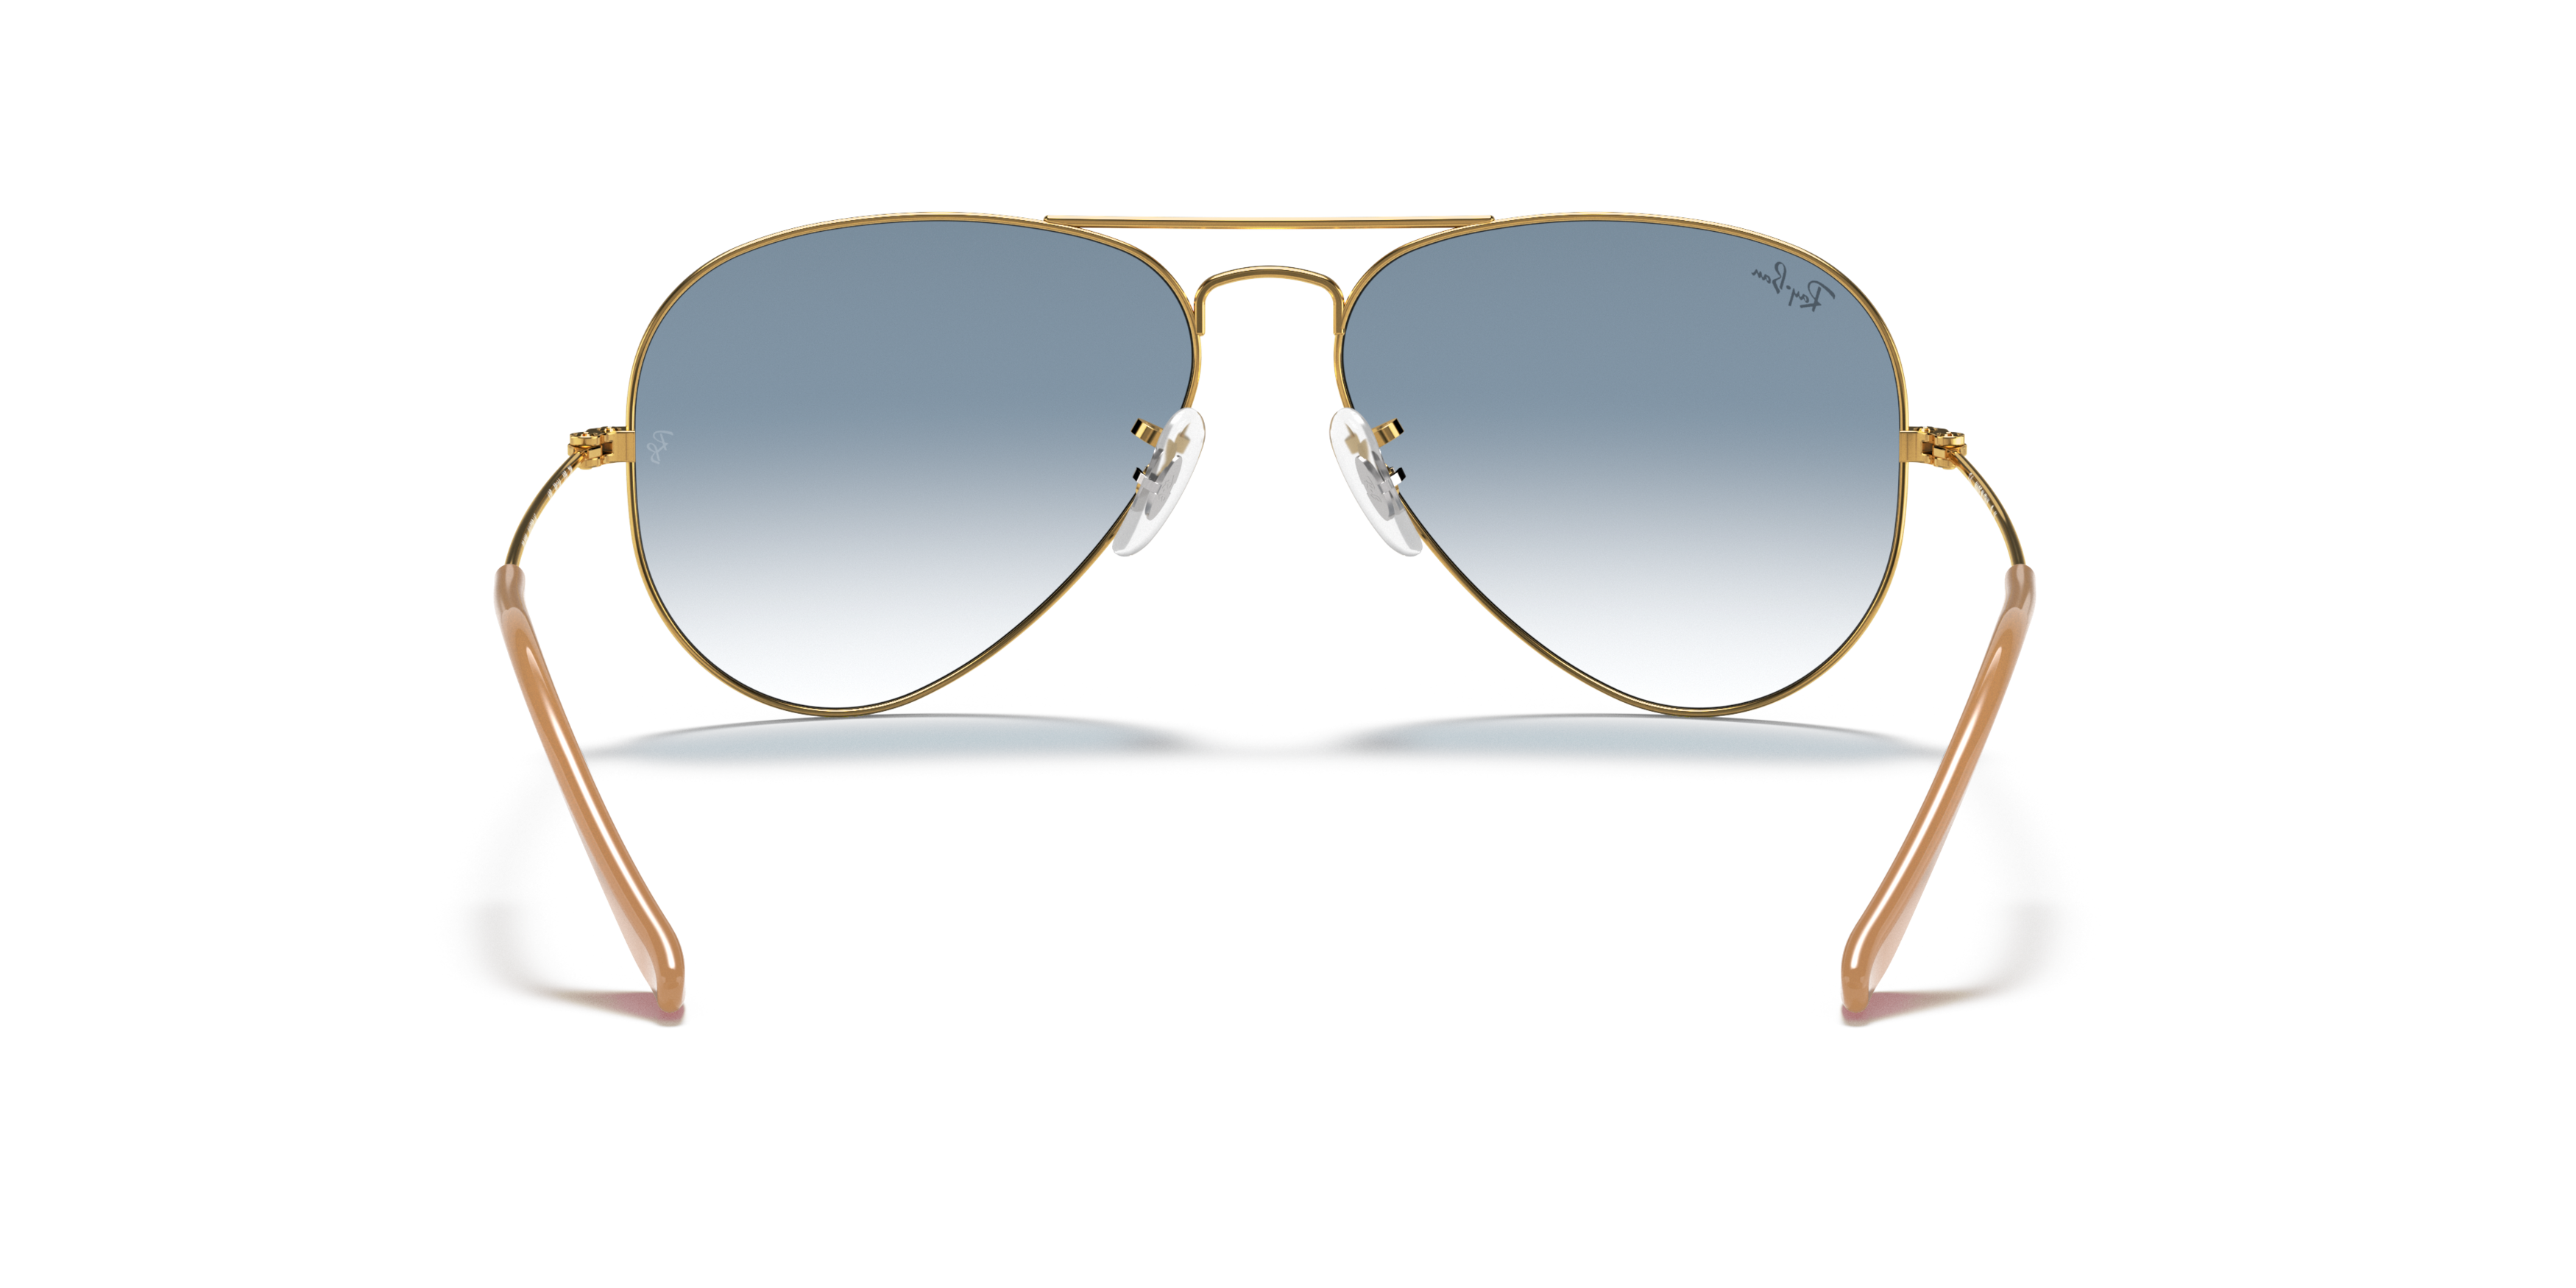 [products.image.detail02] Ray-Ban Aviator Gradient RB3025 001/3F